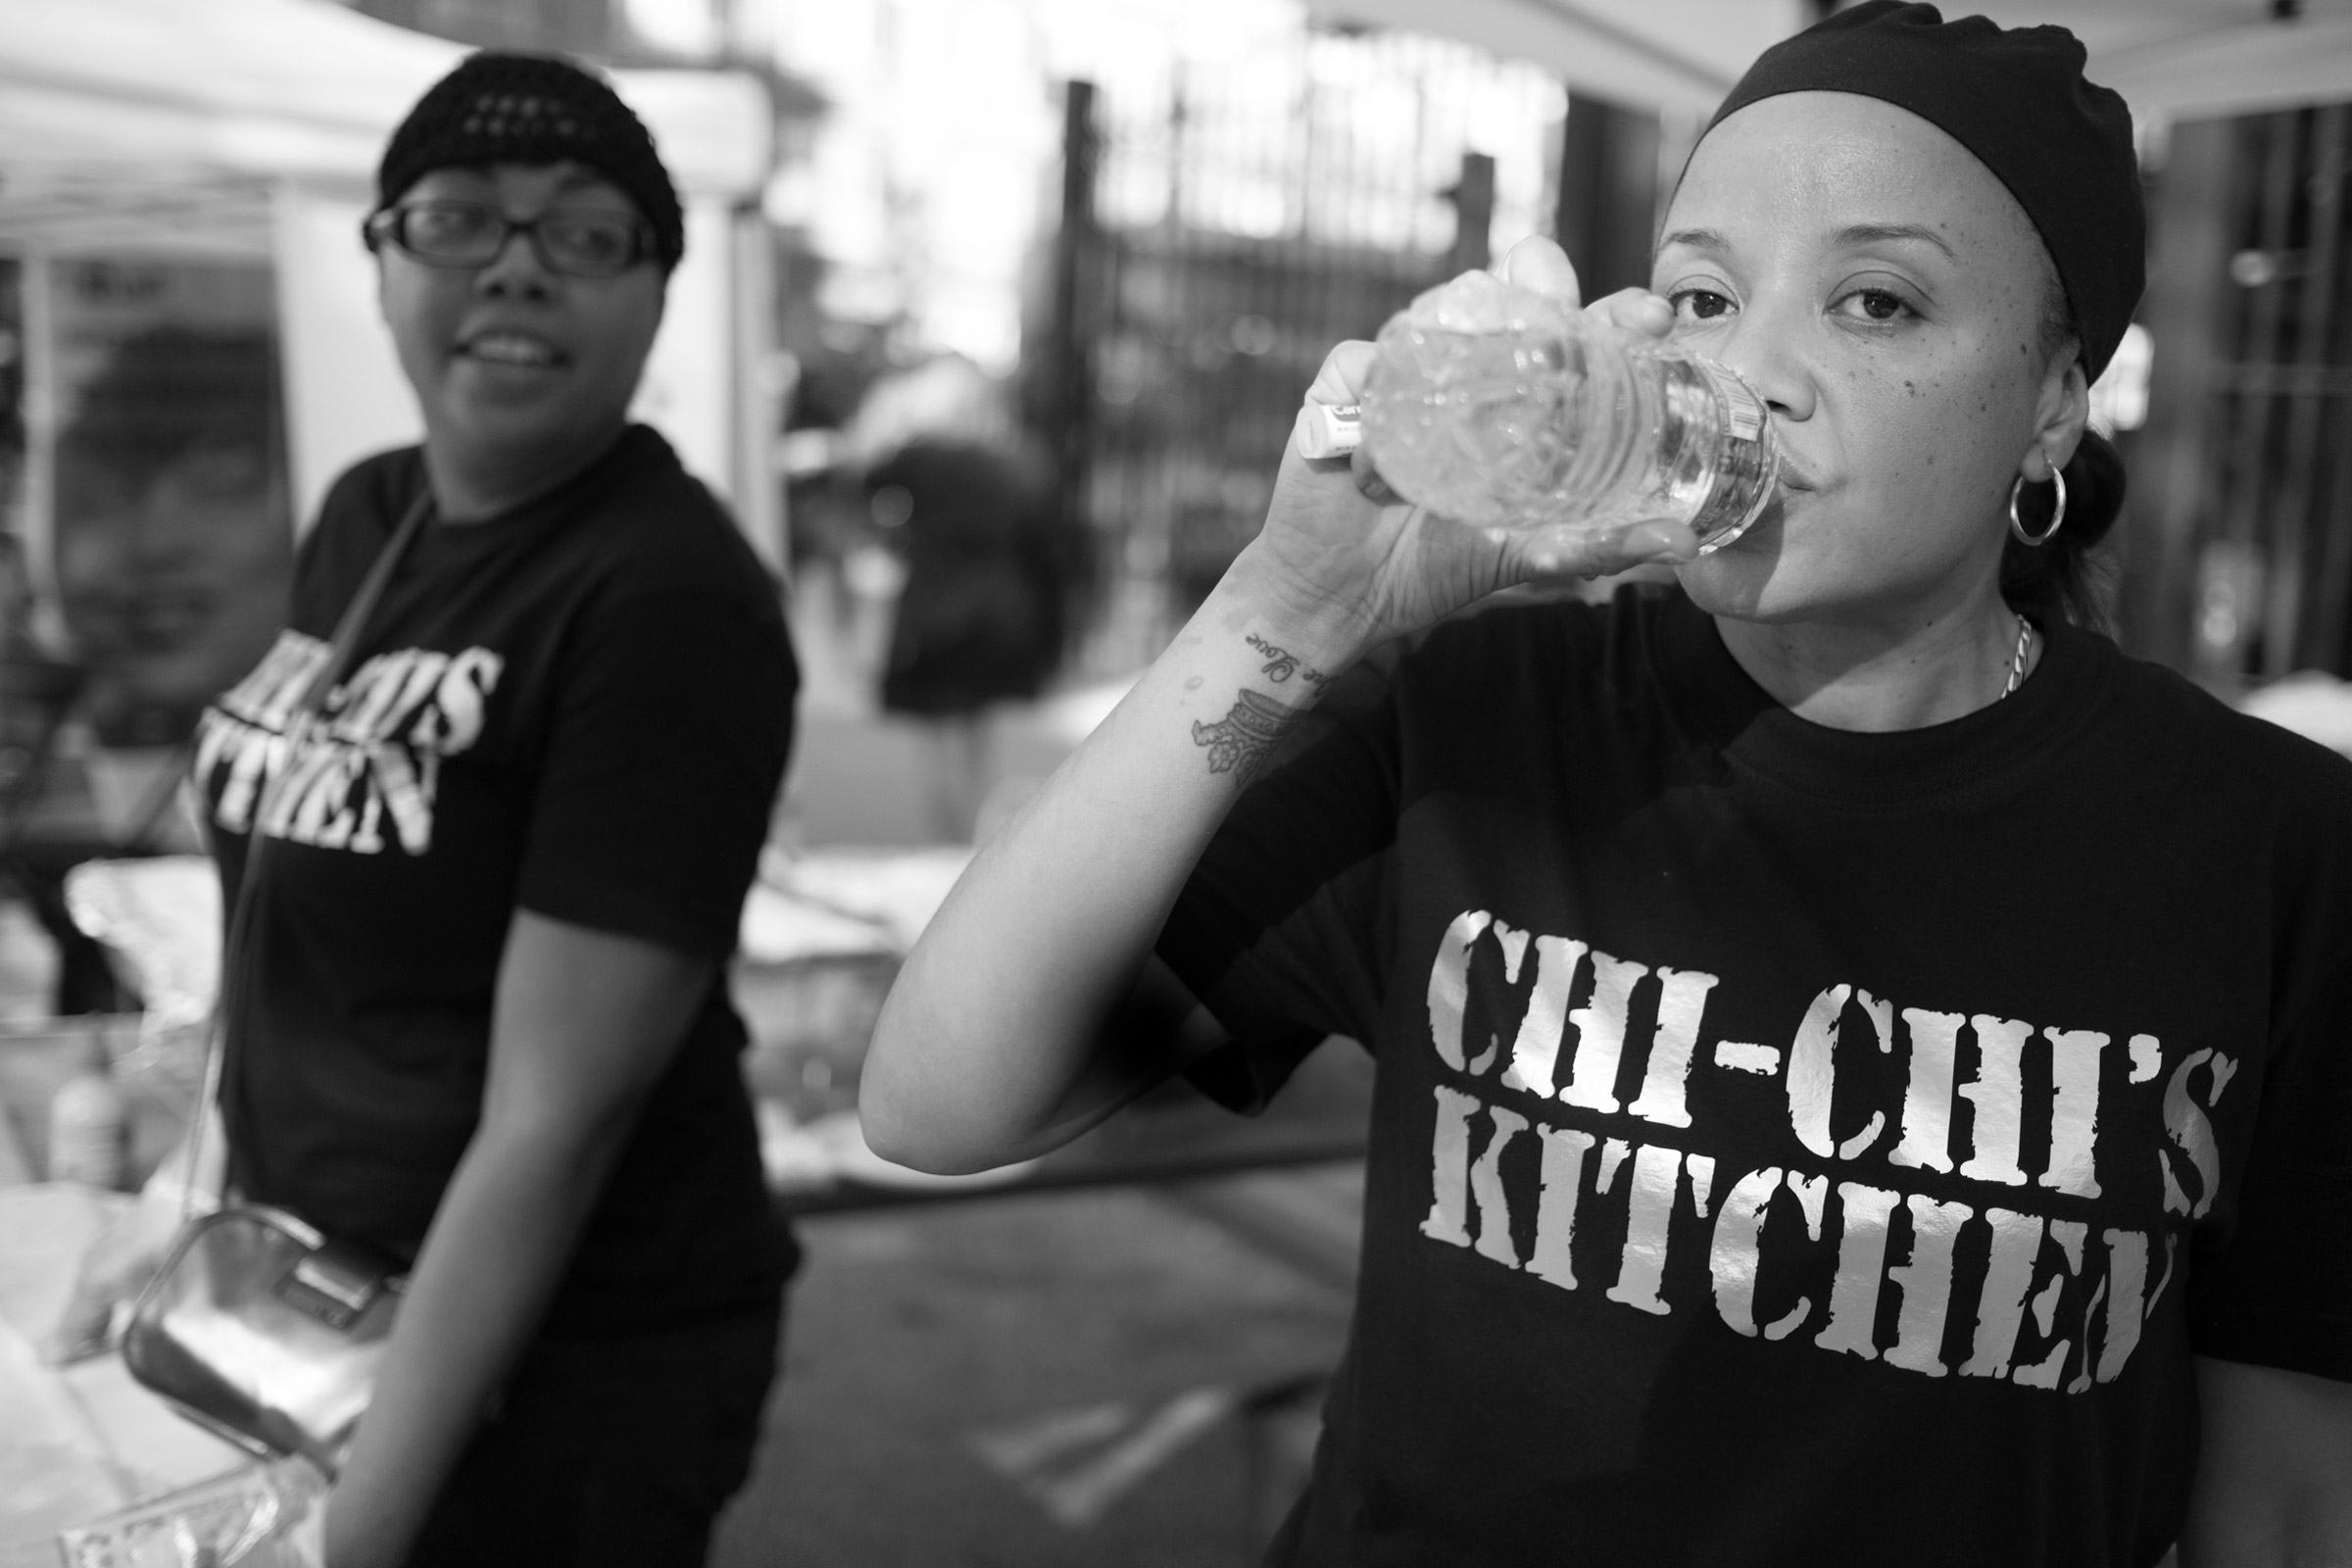  Keila, with her own catering business, Chi Chi’s Kitchen, at a street fair. New York, NY (2017) 